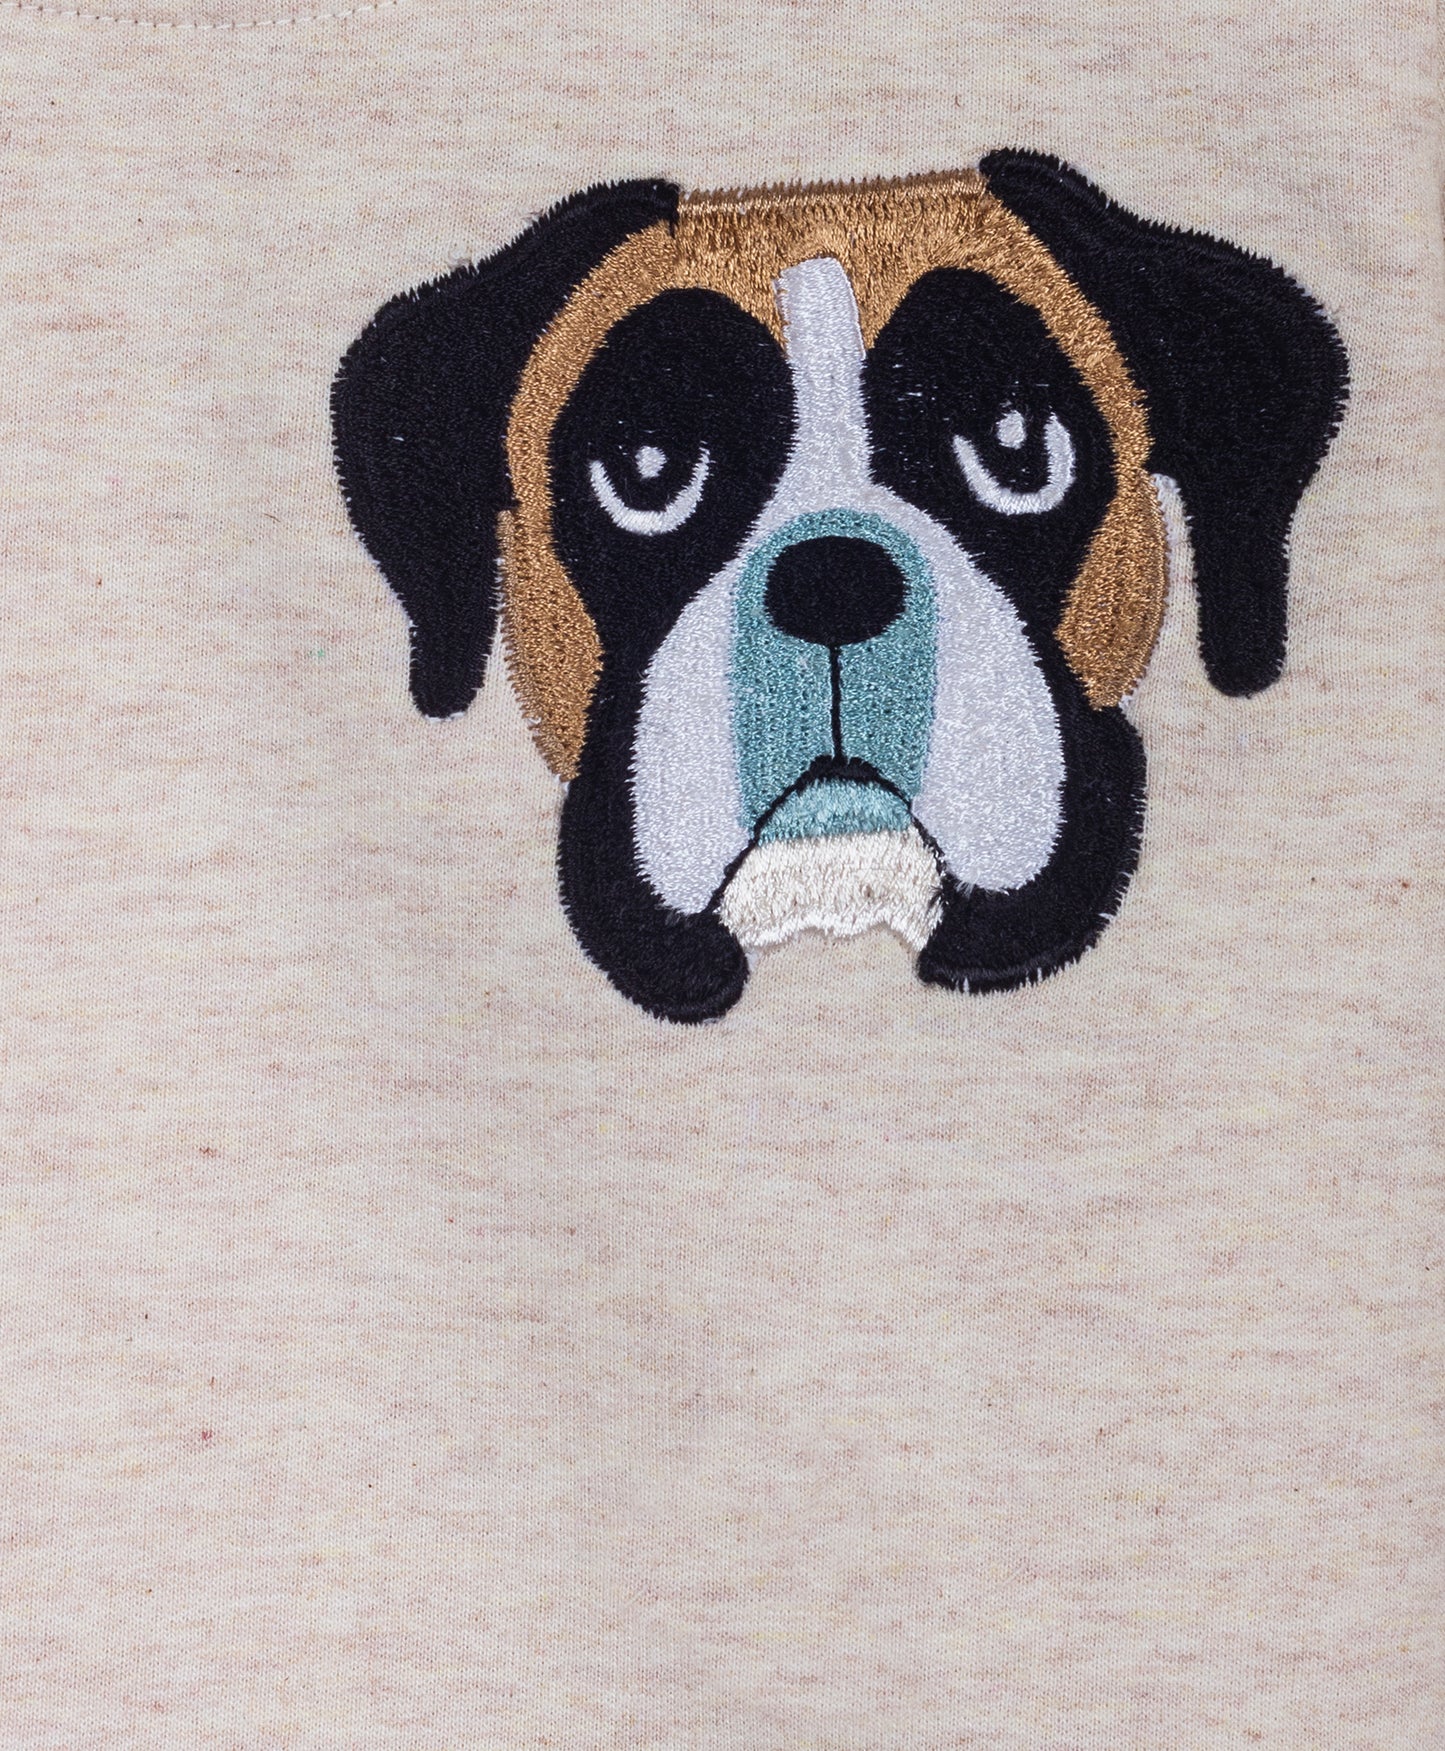 Beige tracksuit with dog face embroidery on chest